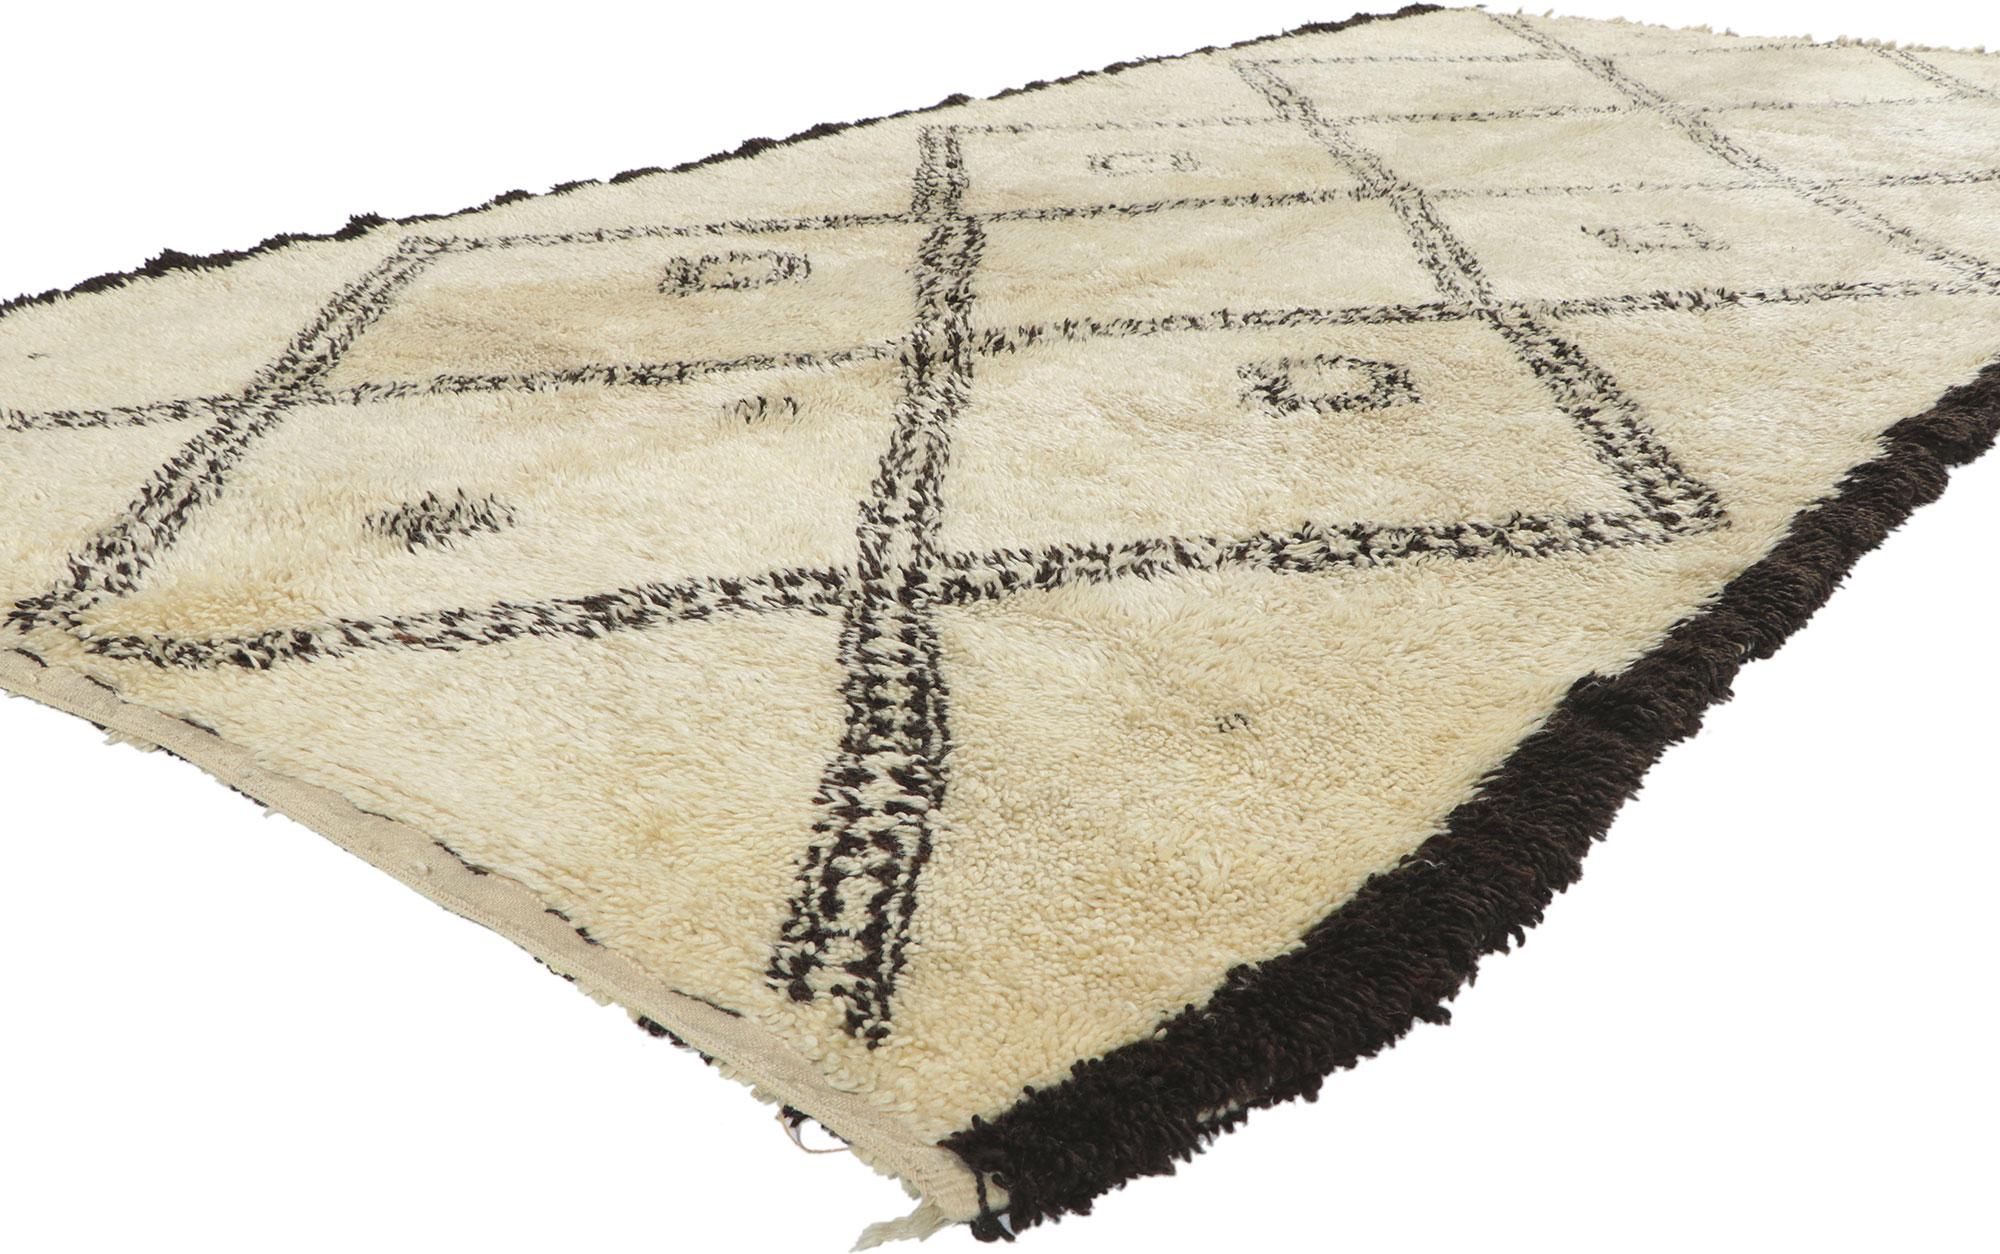 78388 Vintage Moroccan Beni Ourain rug, 06'00 x 11'11. With its simplicity, plush pile, incredible detail and texture, this hand knotted wool vintage Beni Ourain Moroccan rug is a captivating vision of woven beauty. The eye-catching diamond trellis